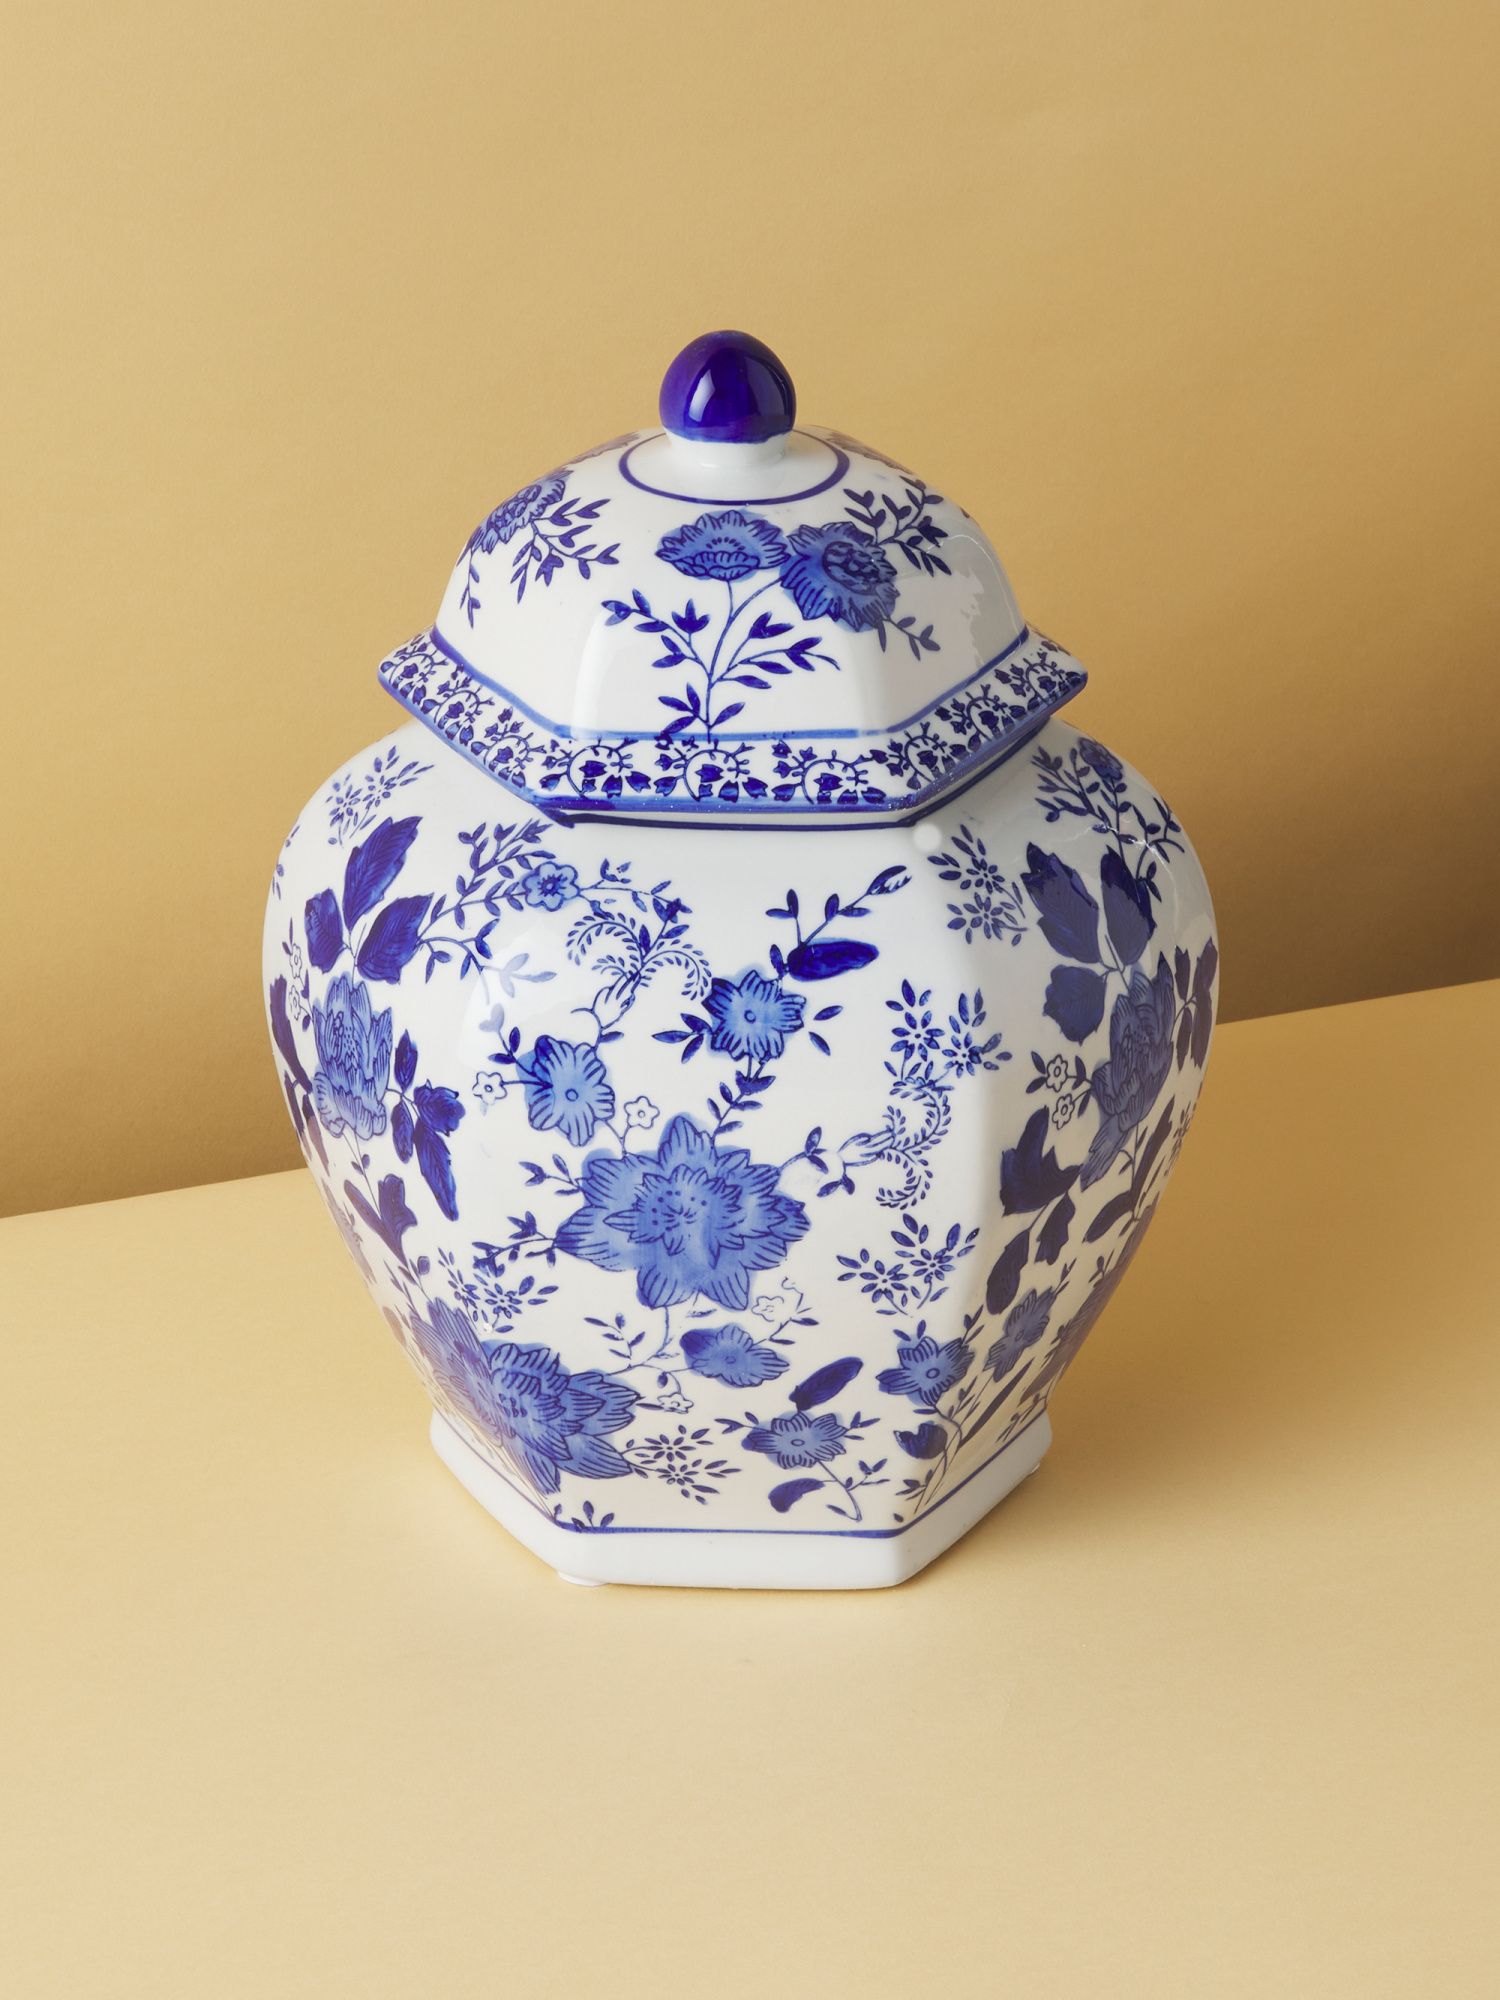 12in Ceramic Chinoiserie Decorative Jar | Decorative Objects | HomeGoods | HomeGoods